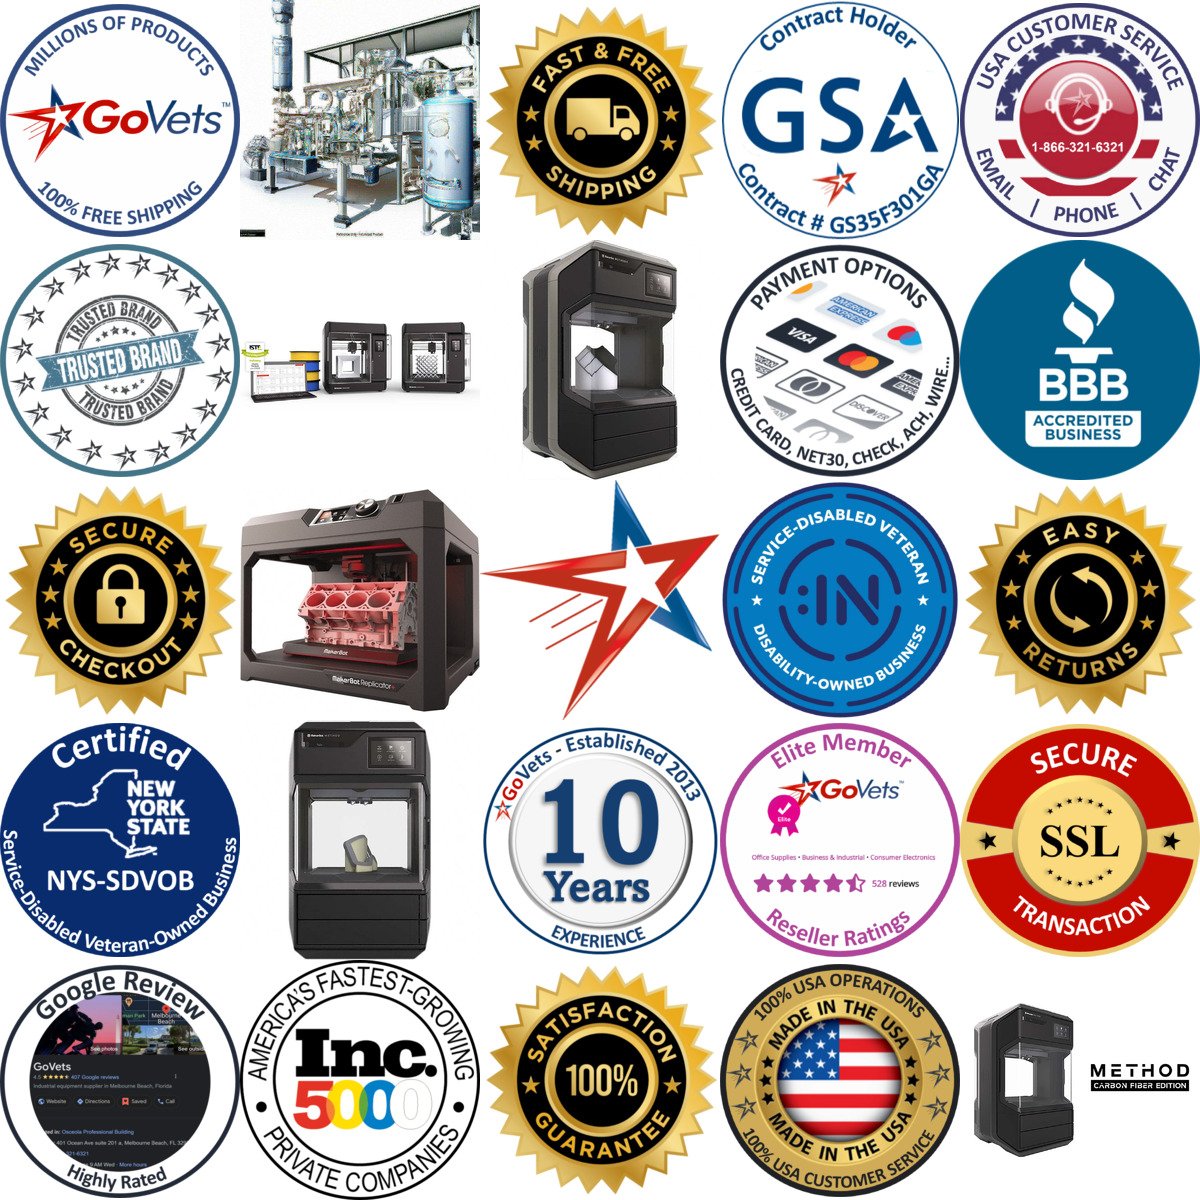 A selection of 3d Printers products on GoVets